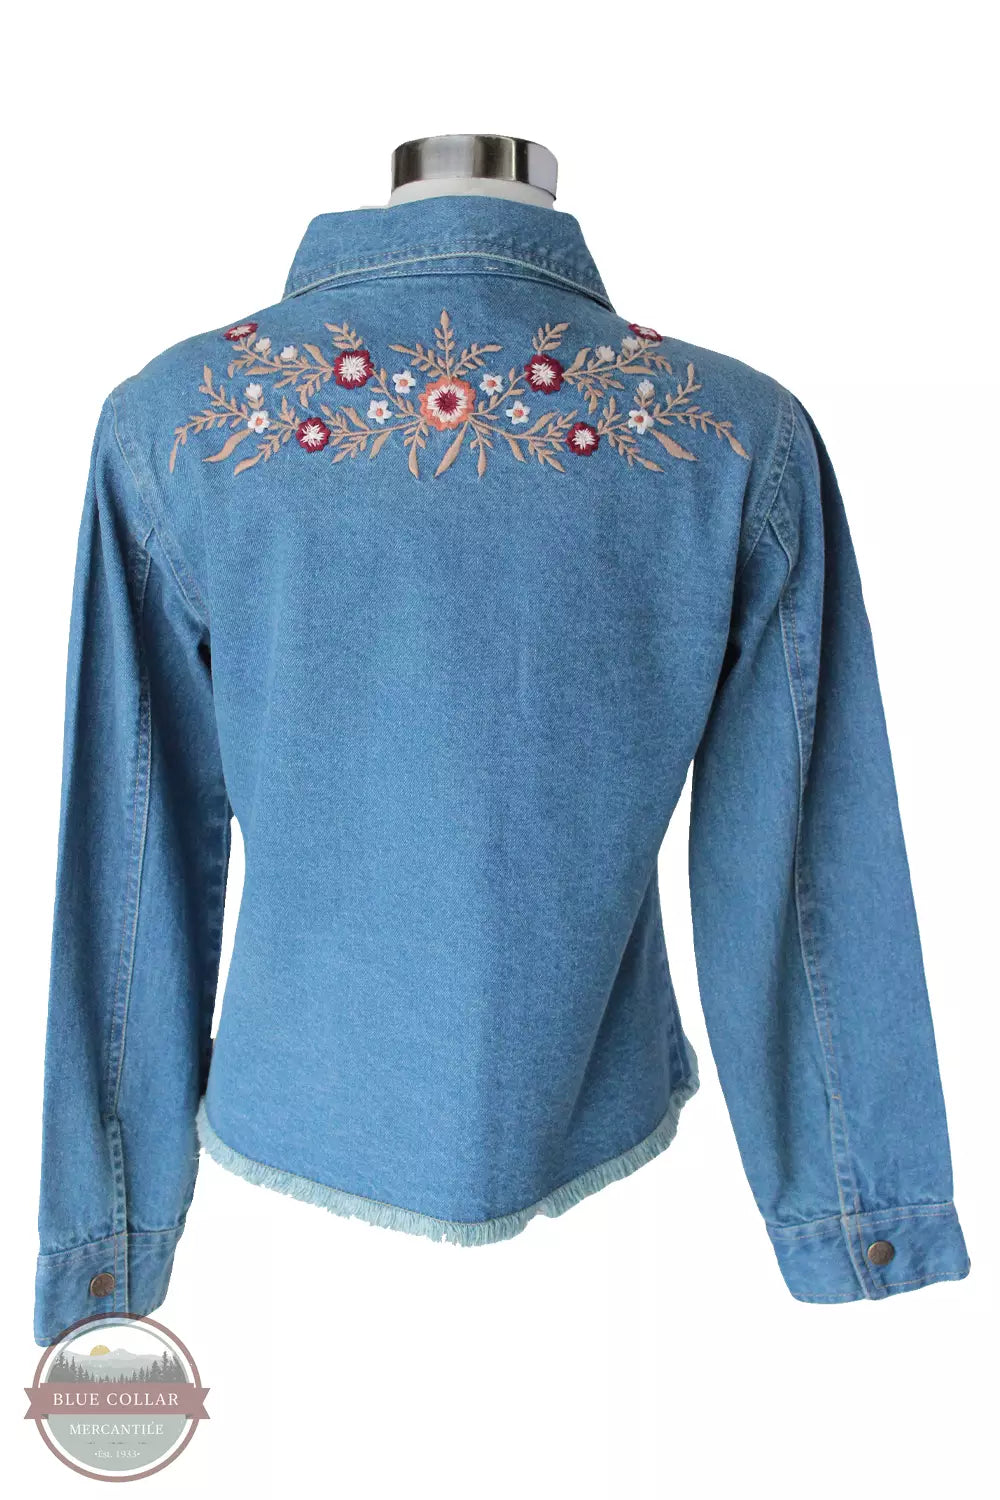 Keren Hart 65002 Denim Jacket with Floral Embroidery Back View